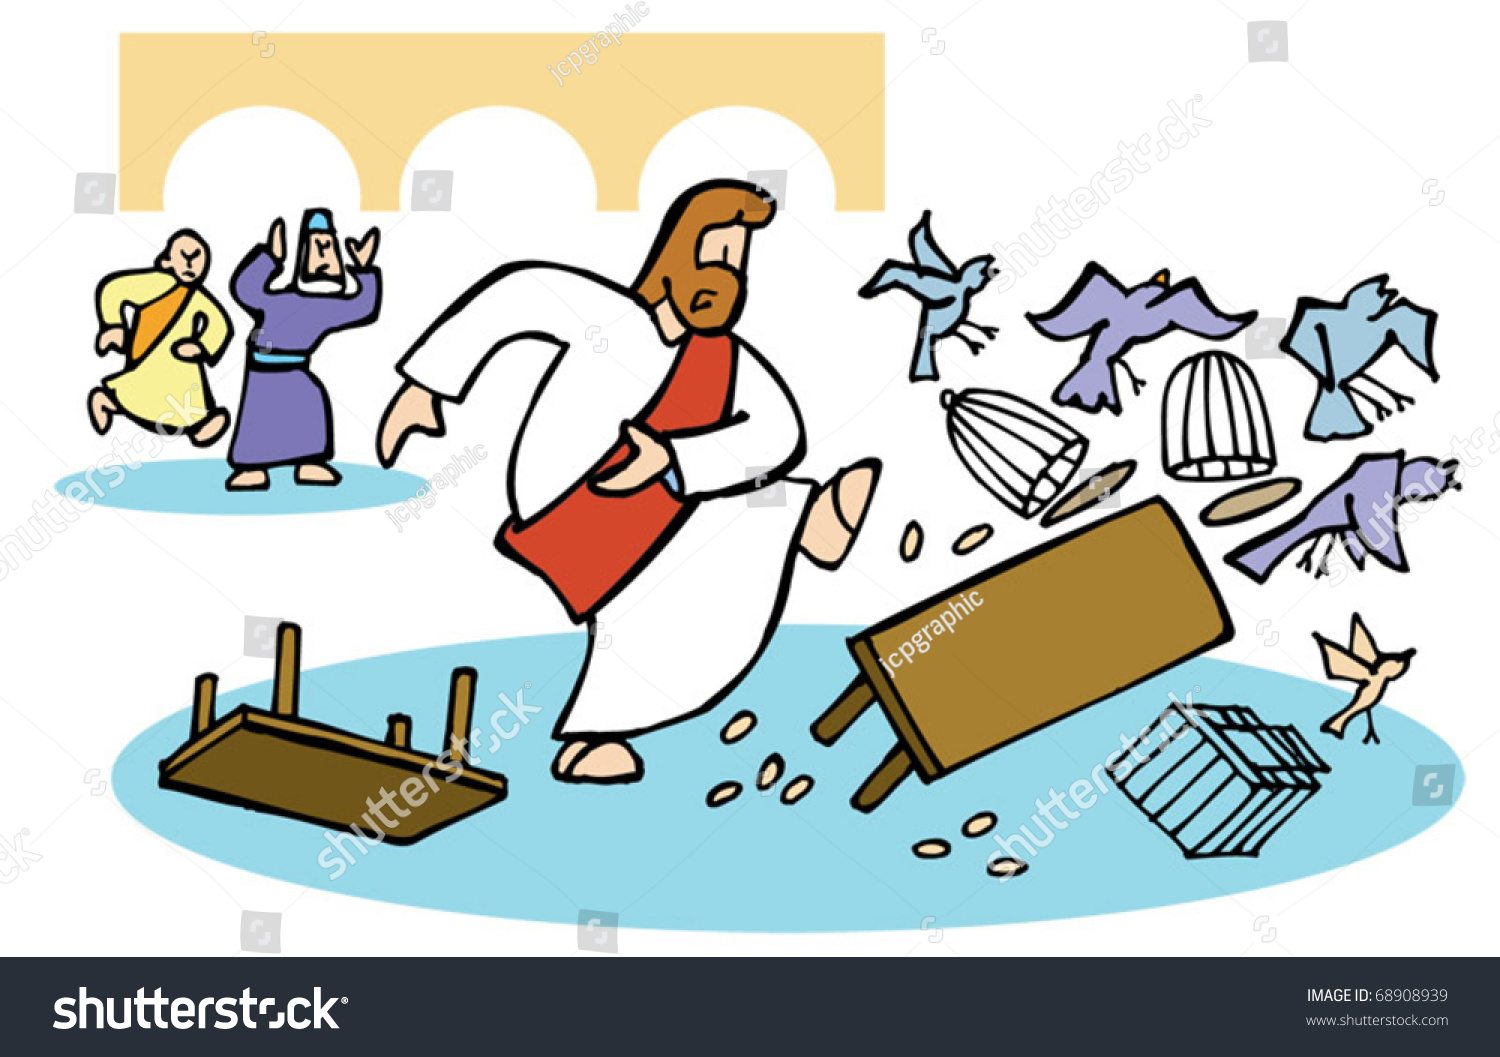 clipart jesus cleansing the temple - photo #40